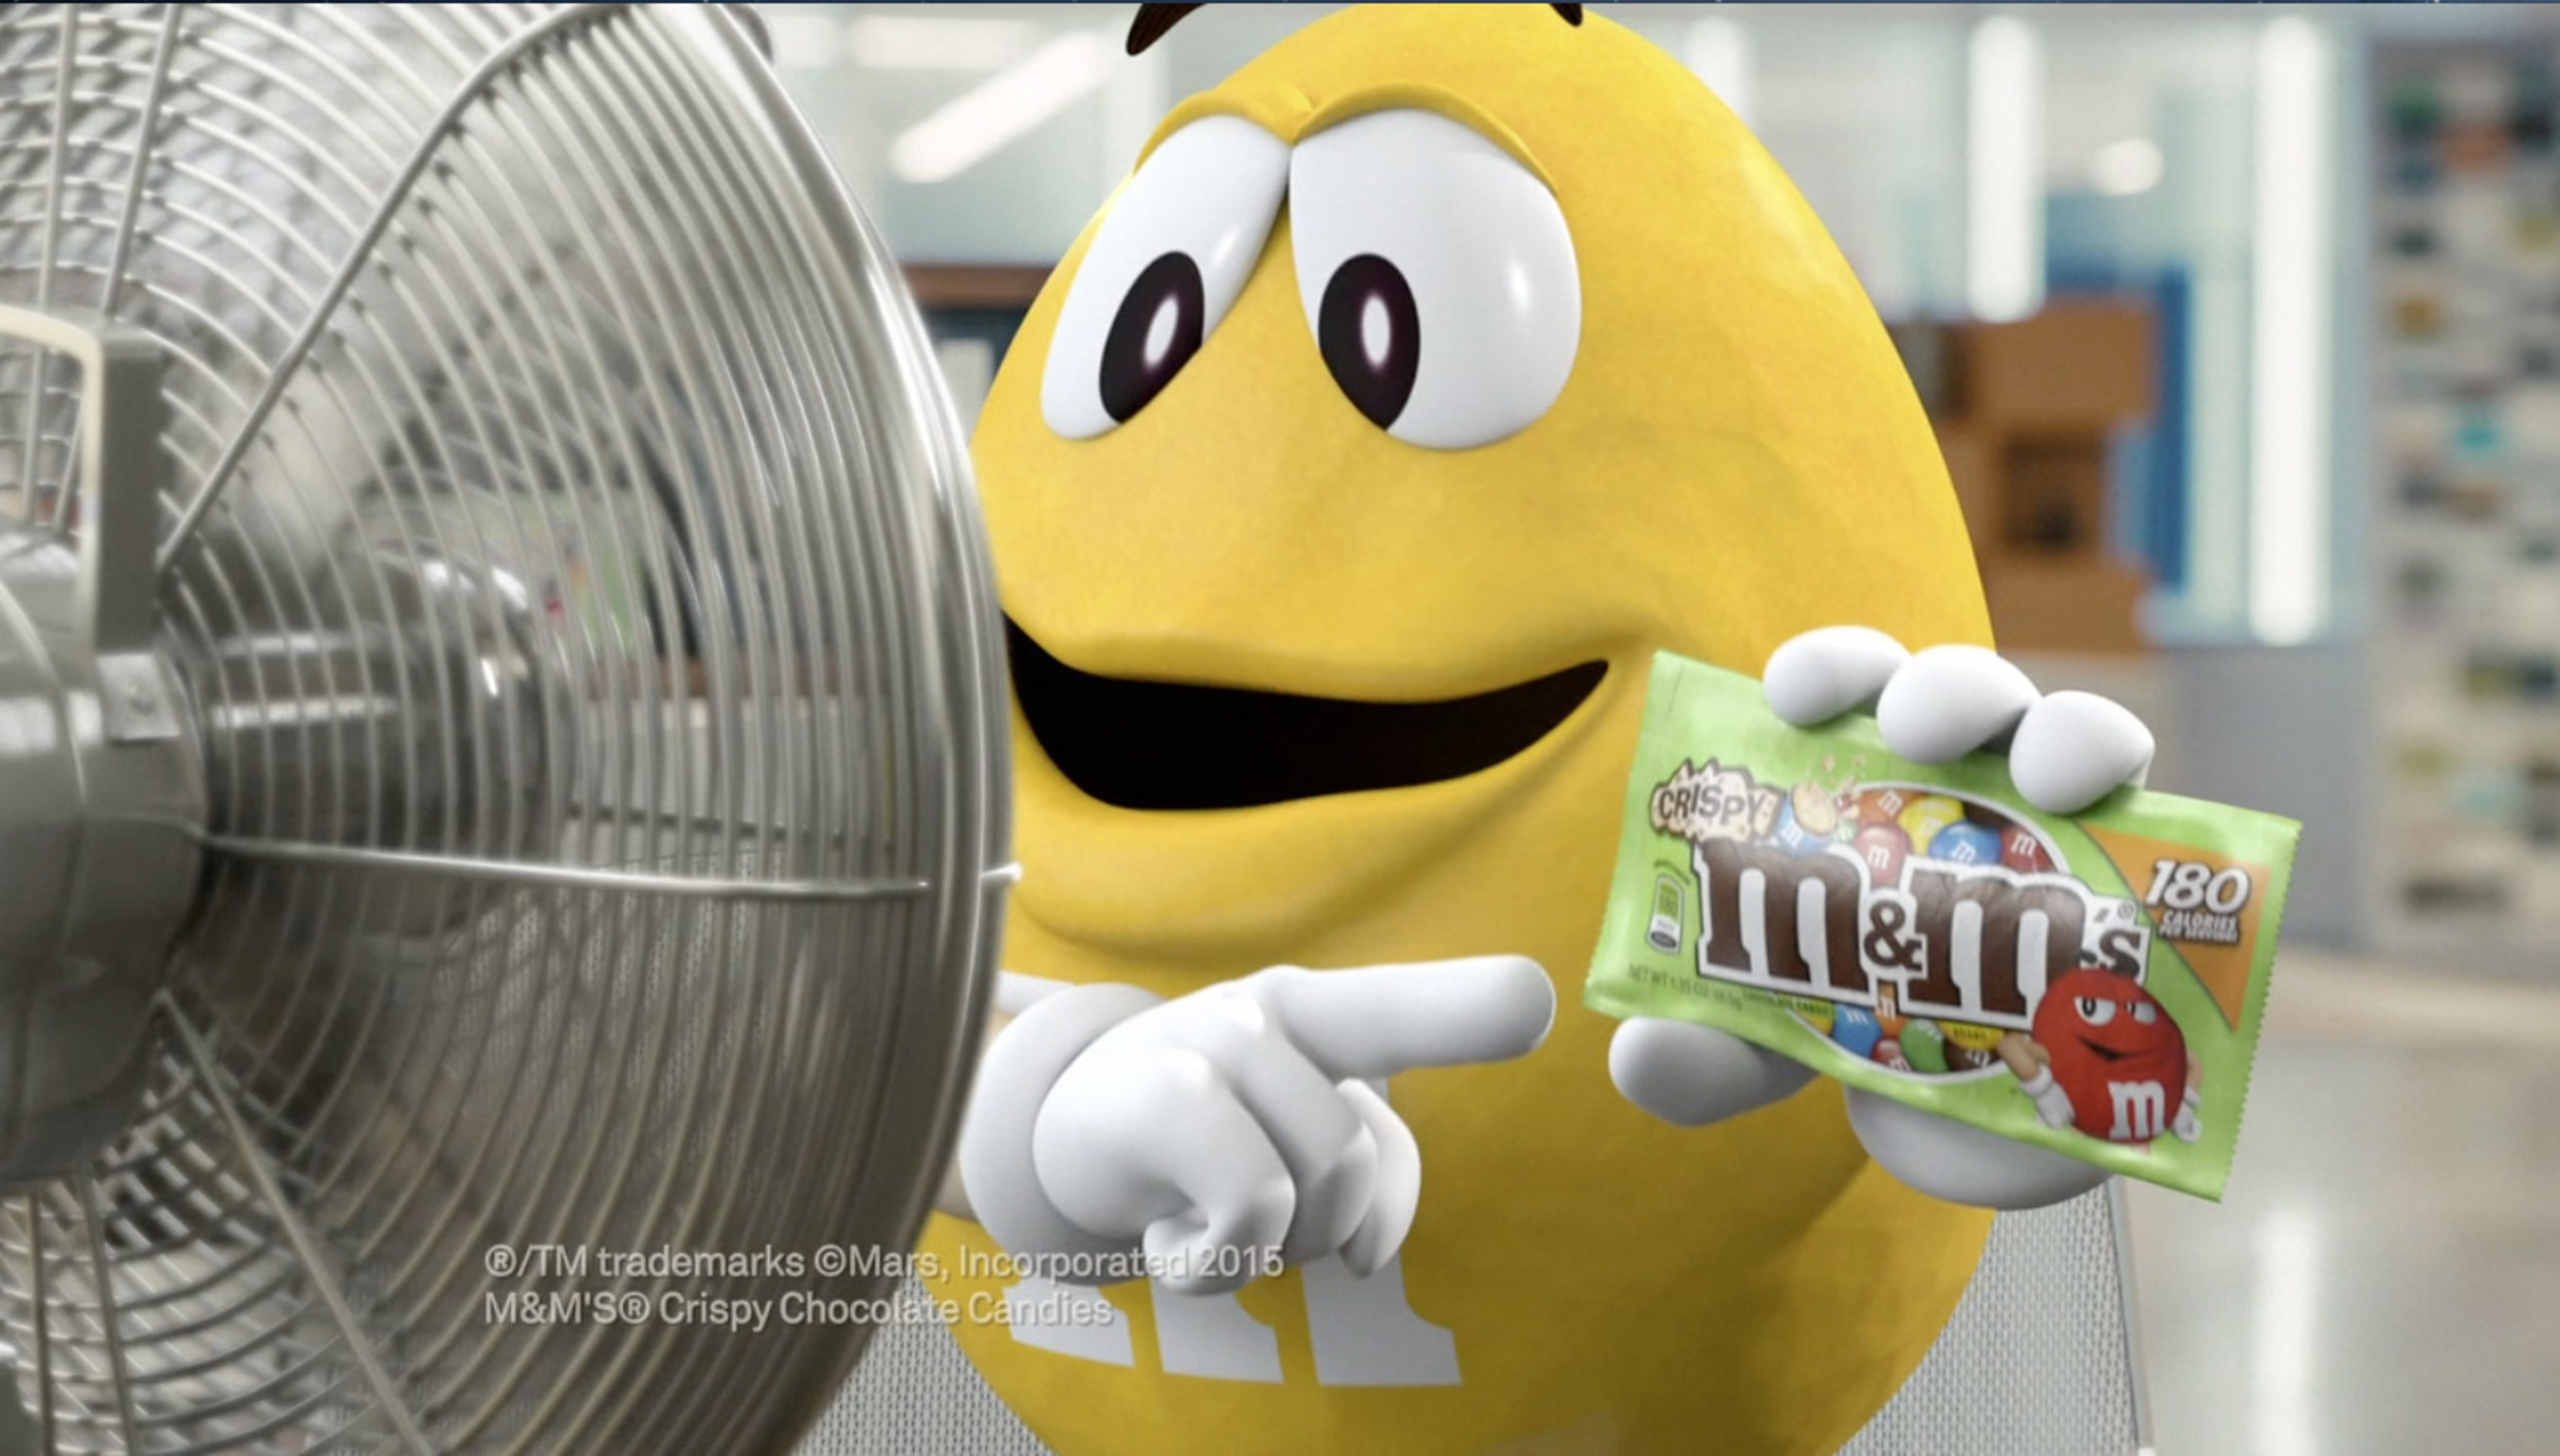 (January 12, 2015) M&M'S(R) "spokescandy" Yellow tells a "fan" that M&M'S(R) Crispy Milk Chocolate Candies are back in a new TV commercial. M&M'S(R) Crispy are returning to store shelves this month after a 10-year hiatus, thanks to countless pleas from consumers.